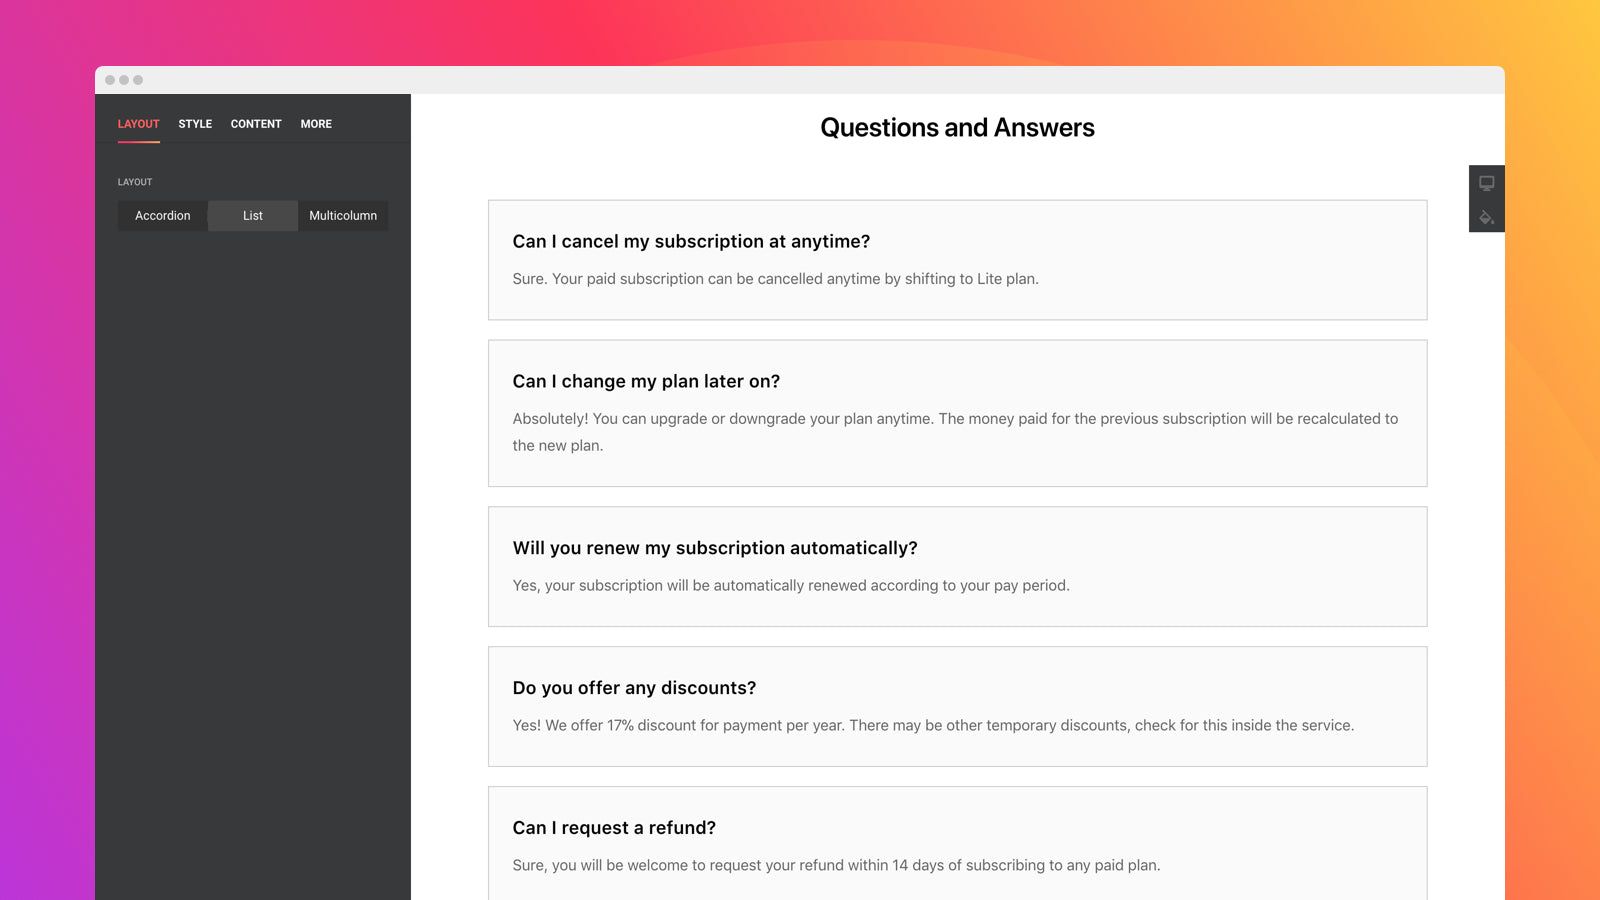 Display your questions in a list